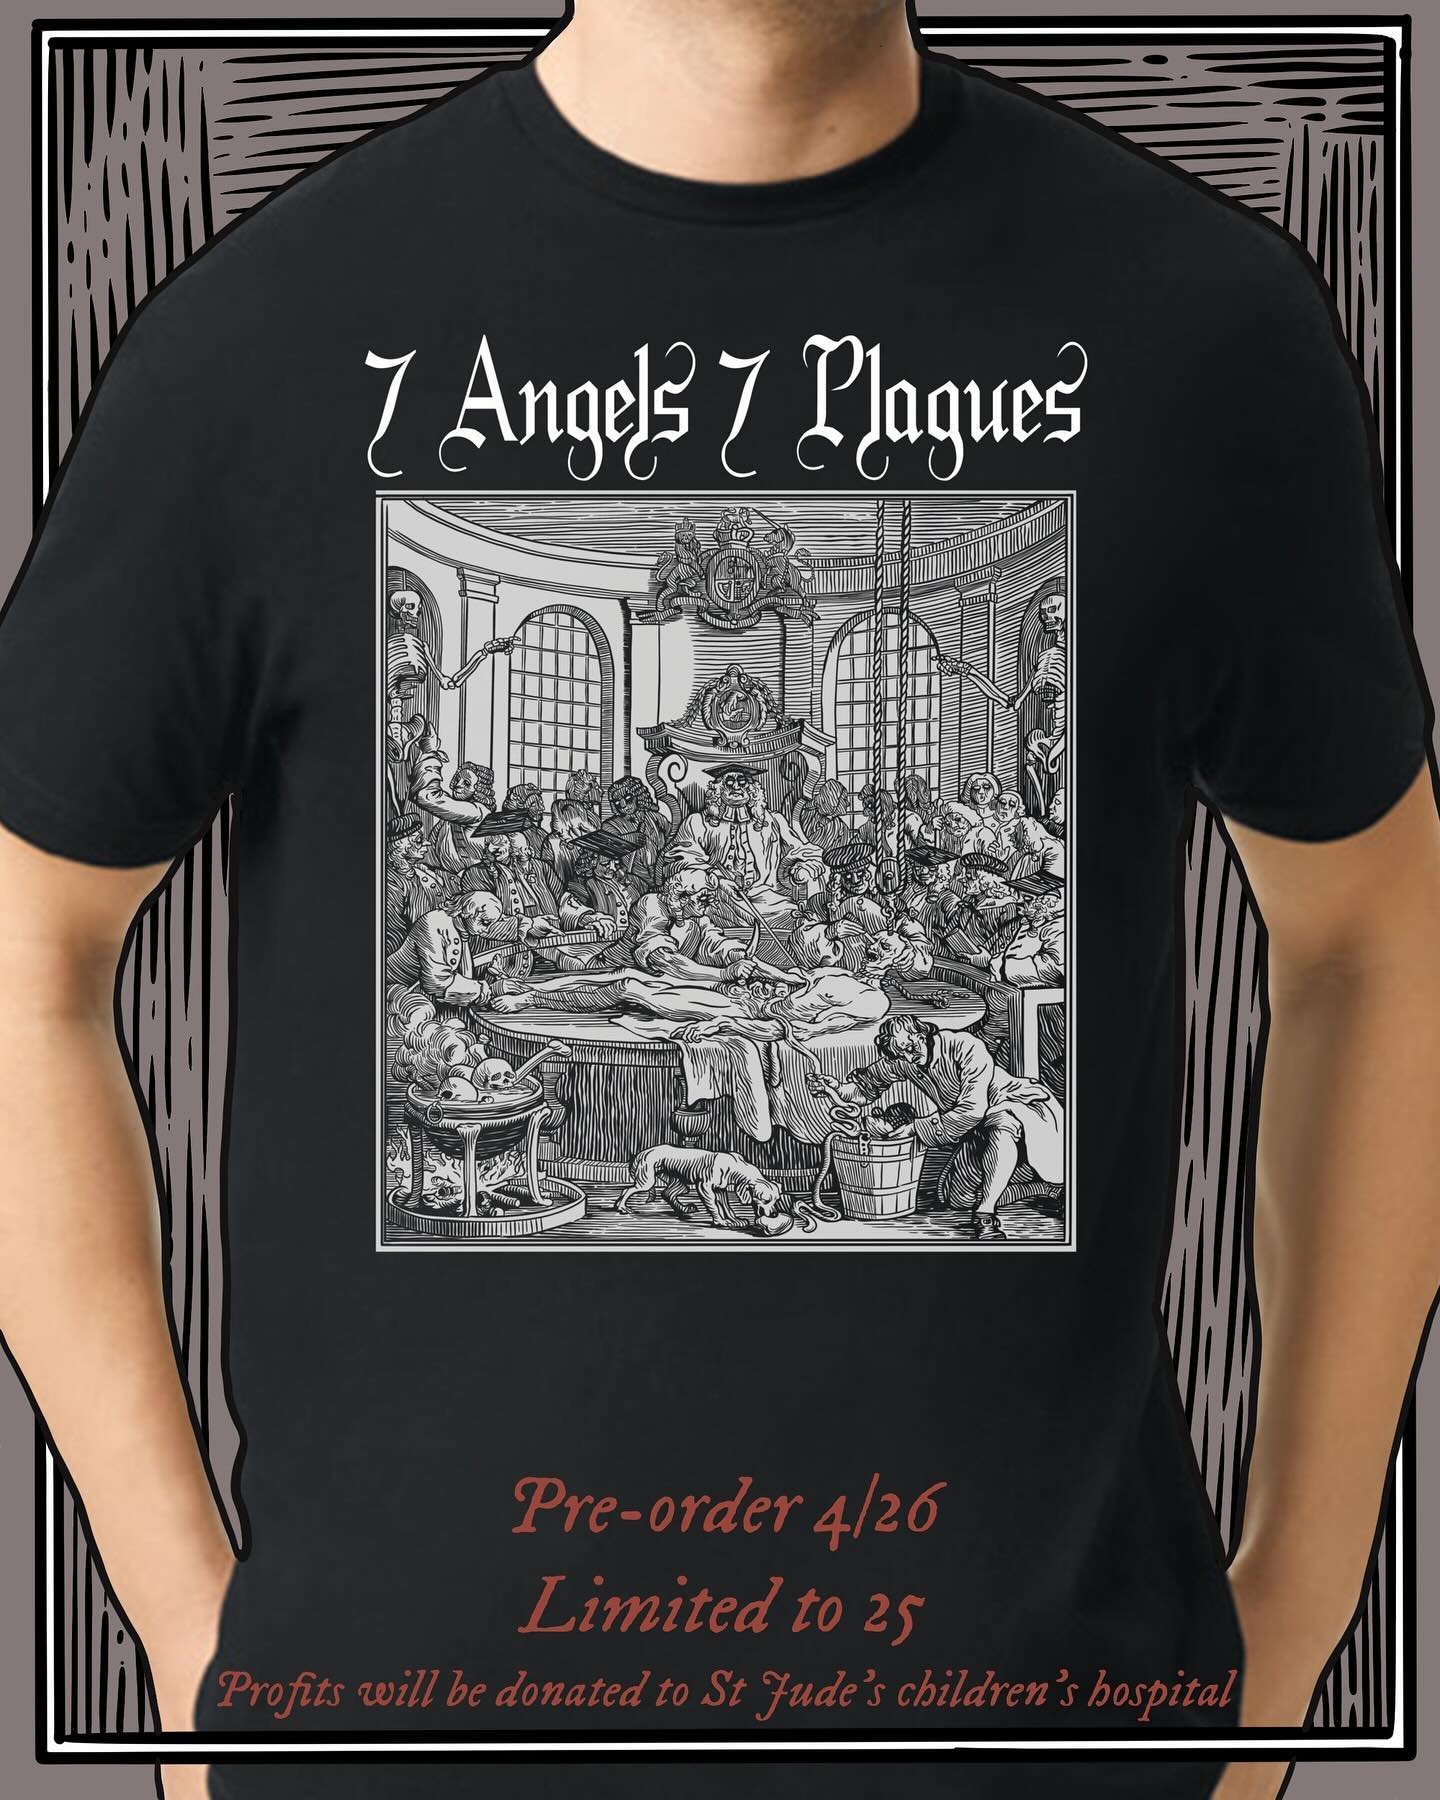 Yo, surprise! Limited edition @7angels7plagues2020 shirt dropping tomorrow at noon EST! 

All profits going to St Jude&rsquo;s! 

#metalcore #metal #charity #fuckcancer #stjudeschildrenshospital #hardcore